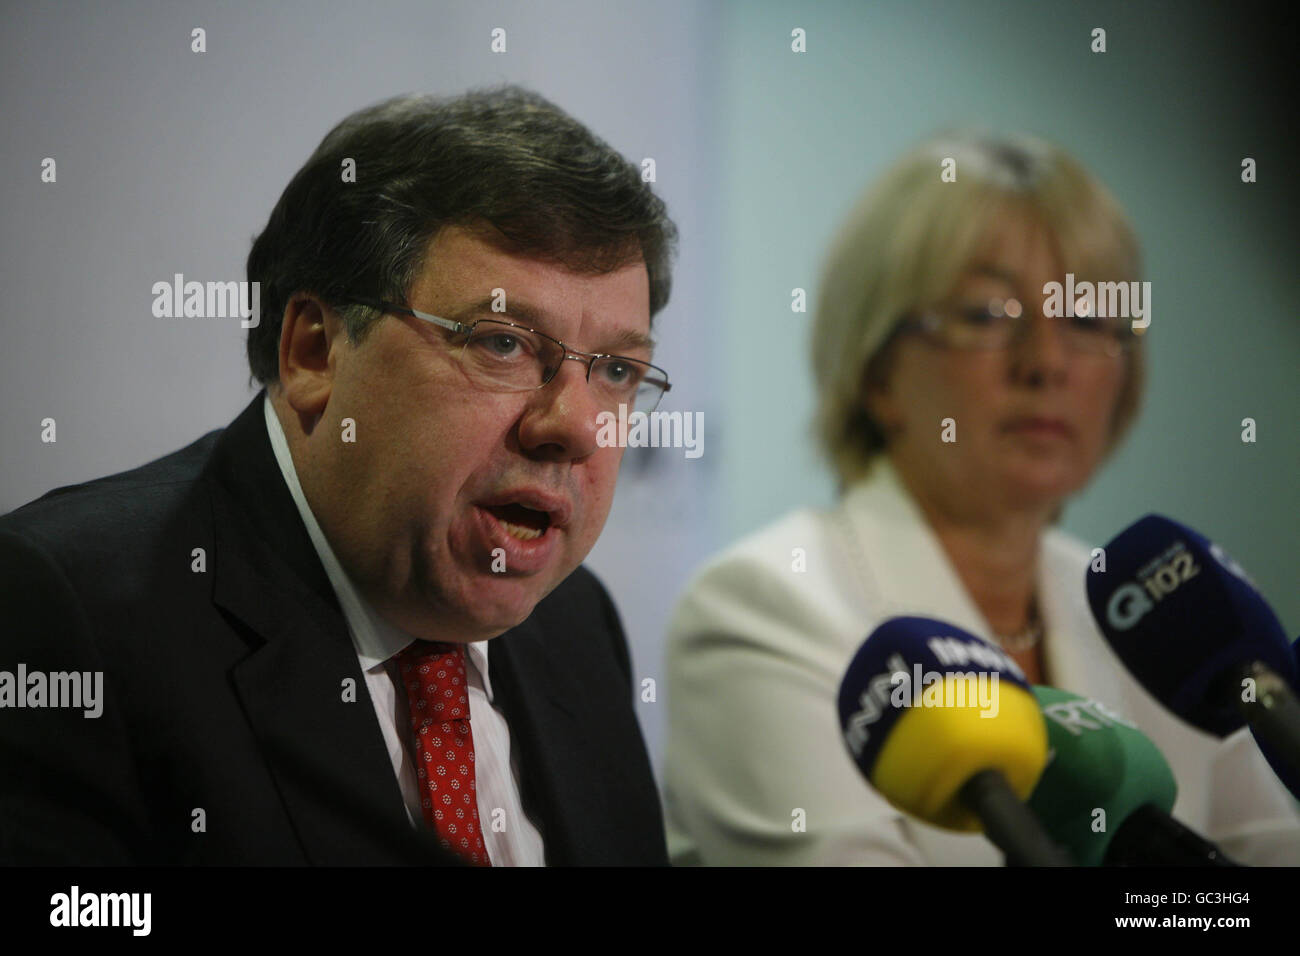 L-R Taoiseach Brian Cowen and Minister for social and family affairs Mary Hanafin hold a press conference on the last day of the Fianna Fail party 'think in' being held at the Hodson Bay Hotel in Athlone. Stock Photo